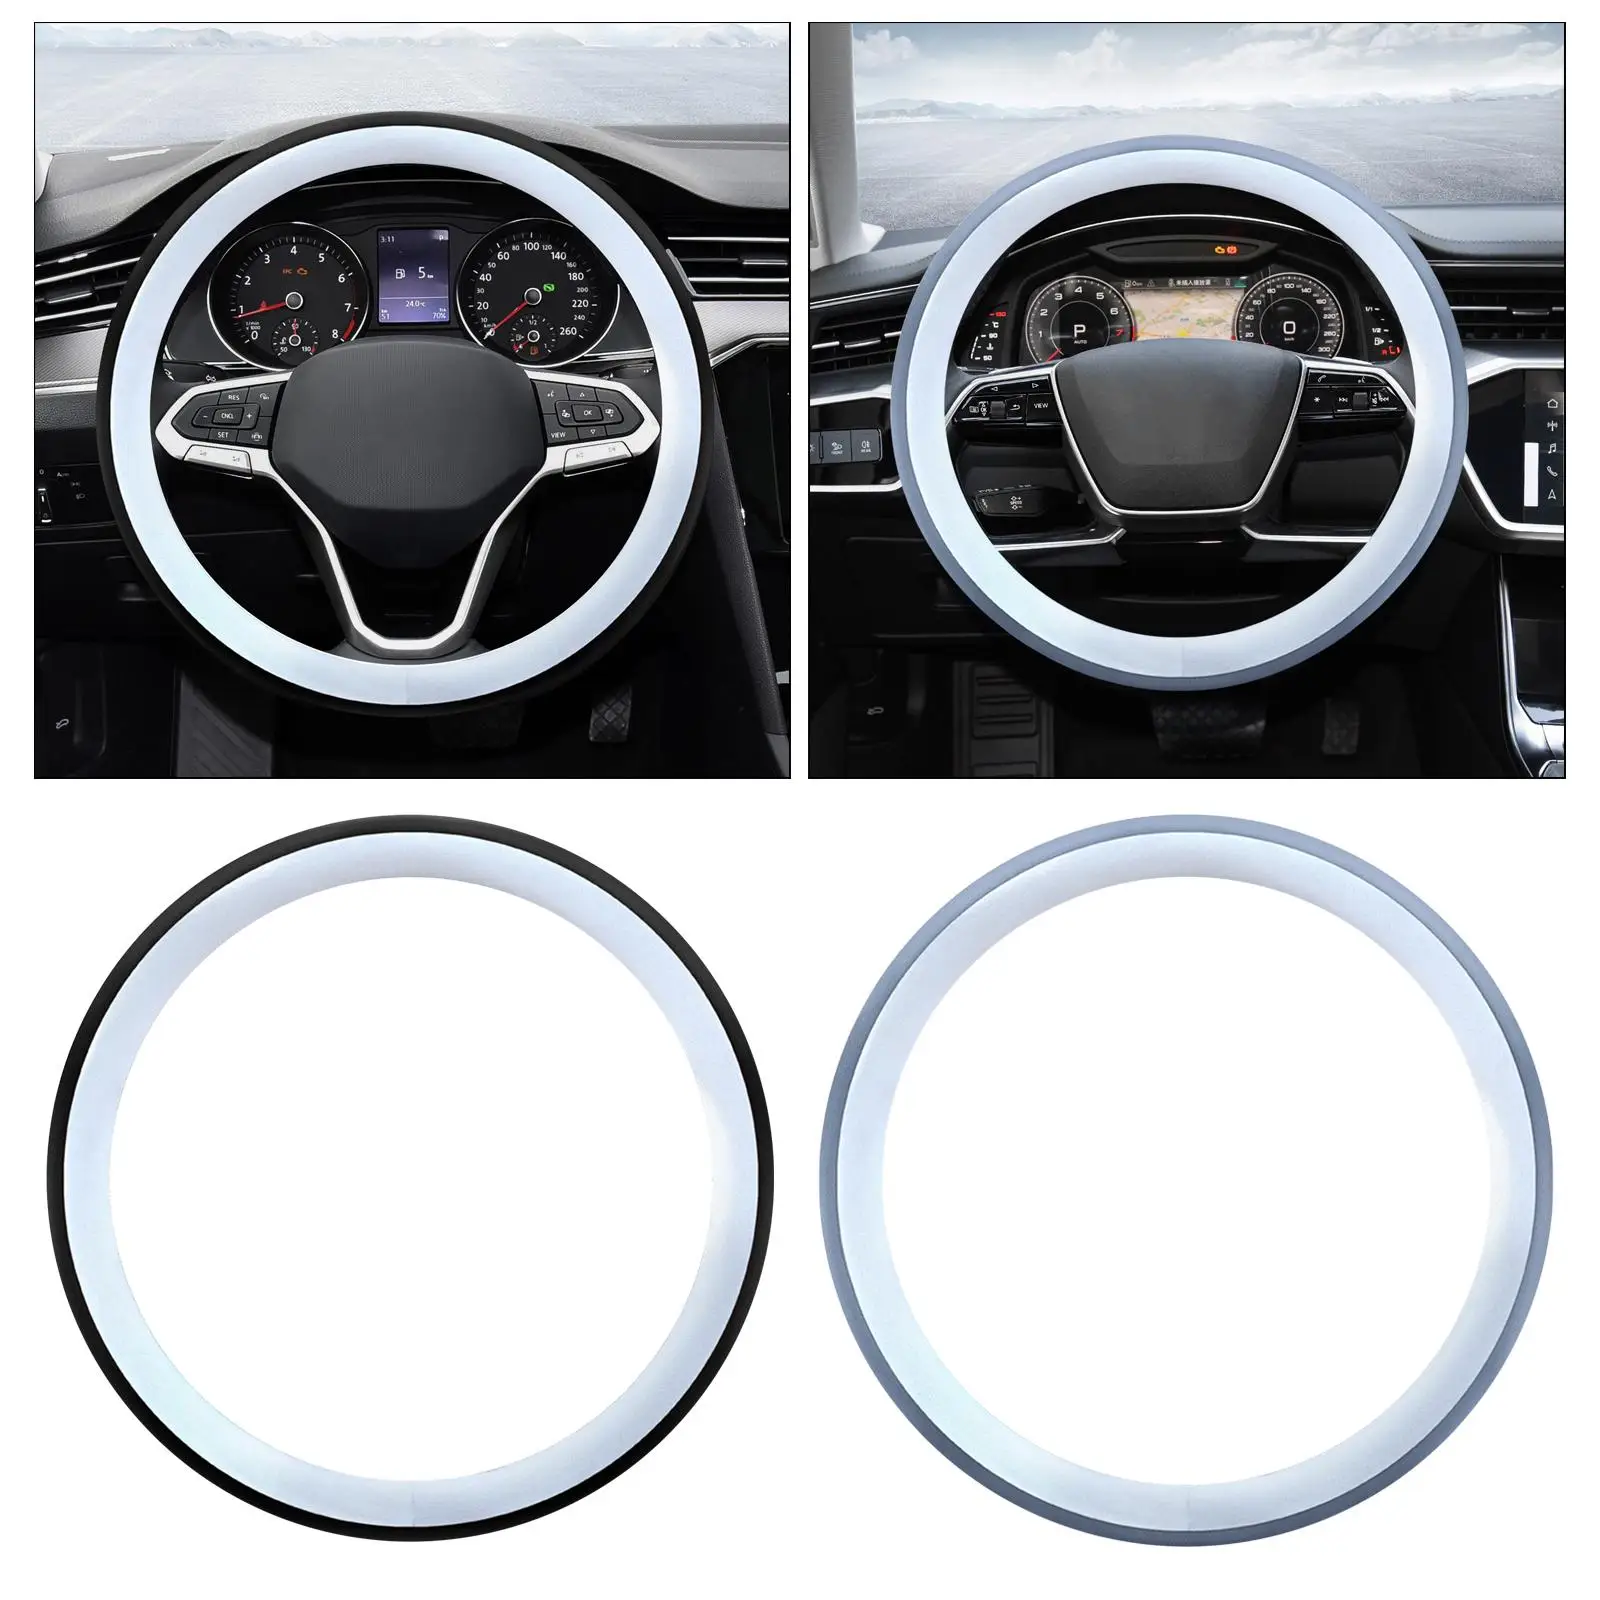 38cm Steering Wheel Cover Protector Anti Slip Breathable Universal for Suvs Trucks Interior Accessories Round Protective Cover